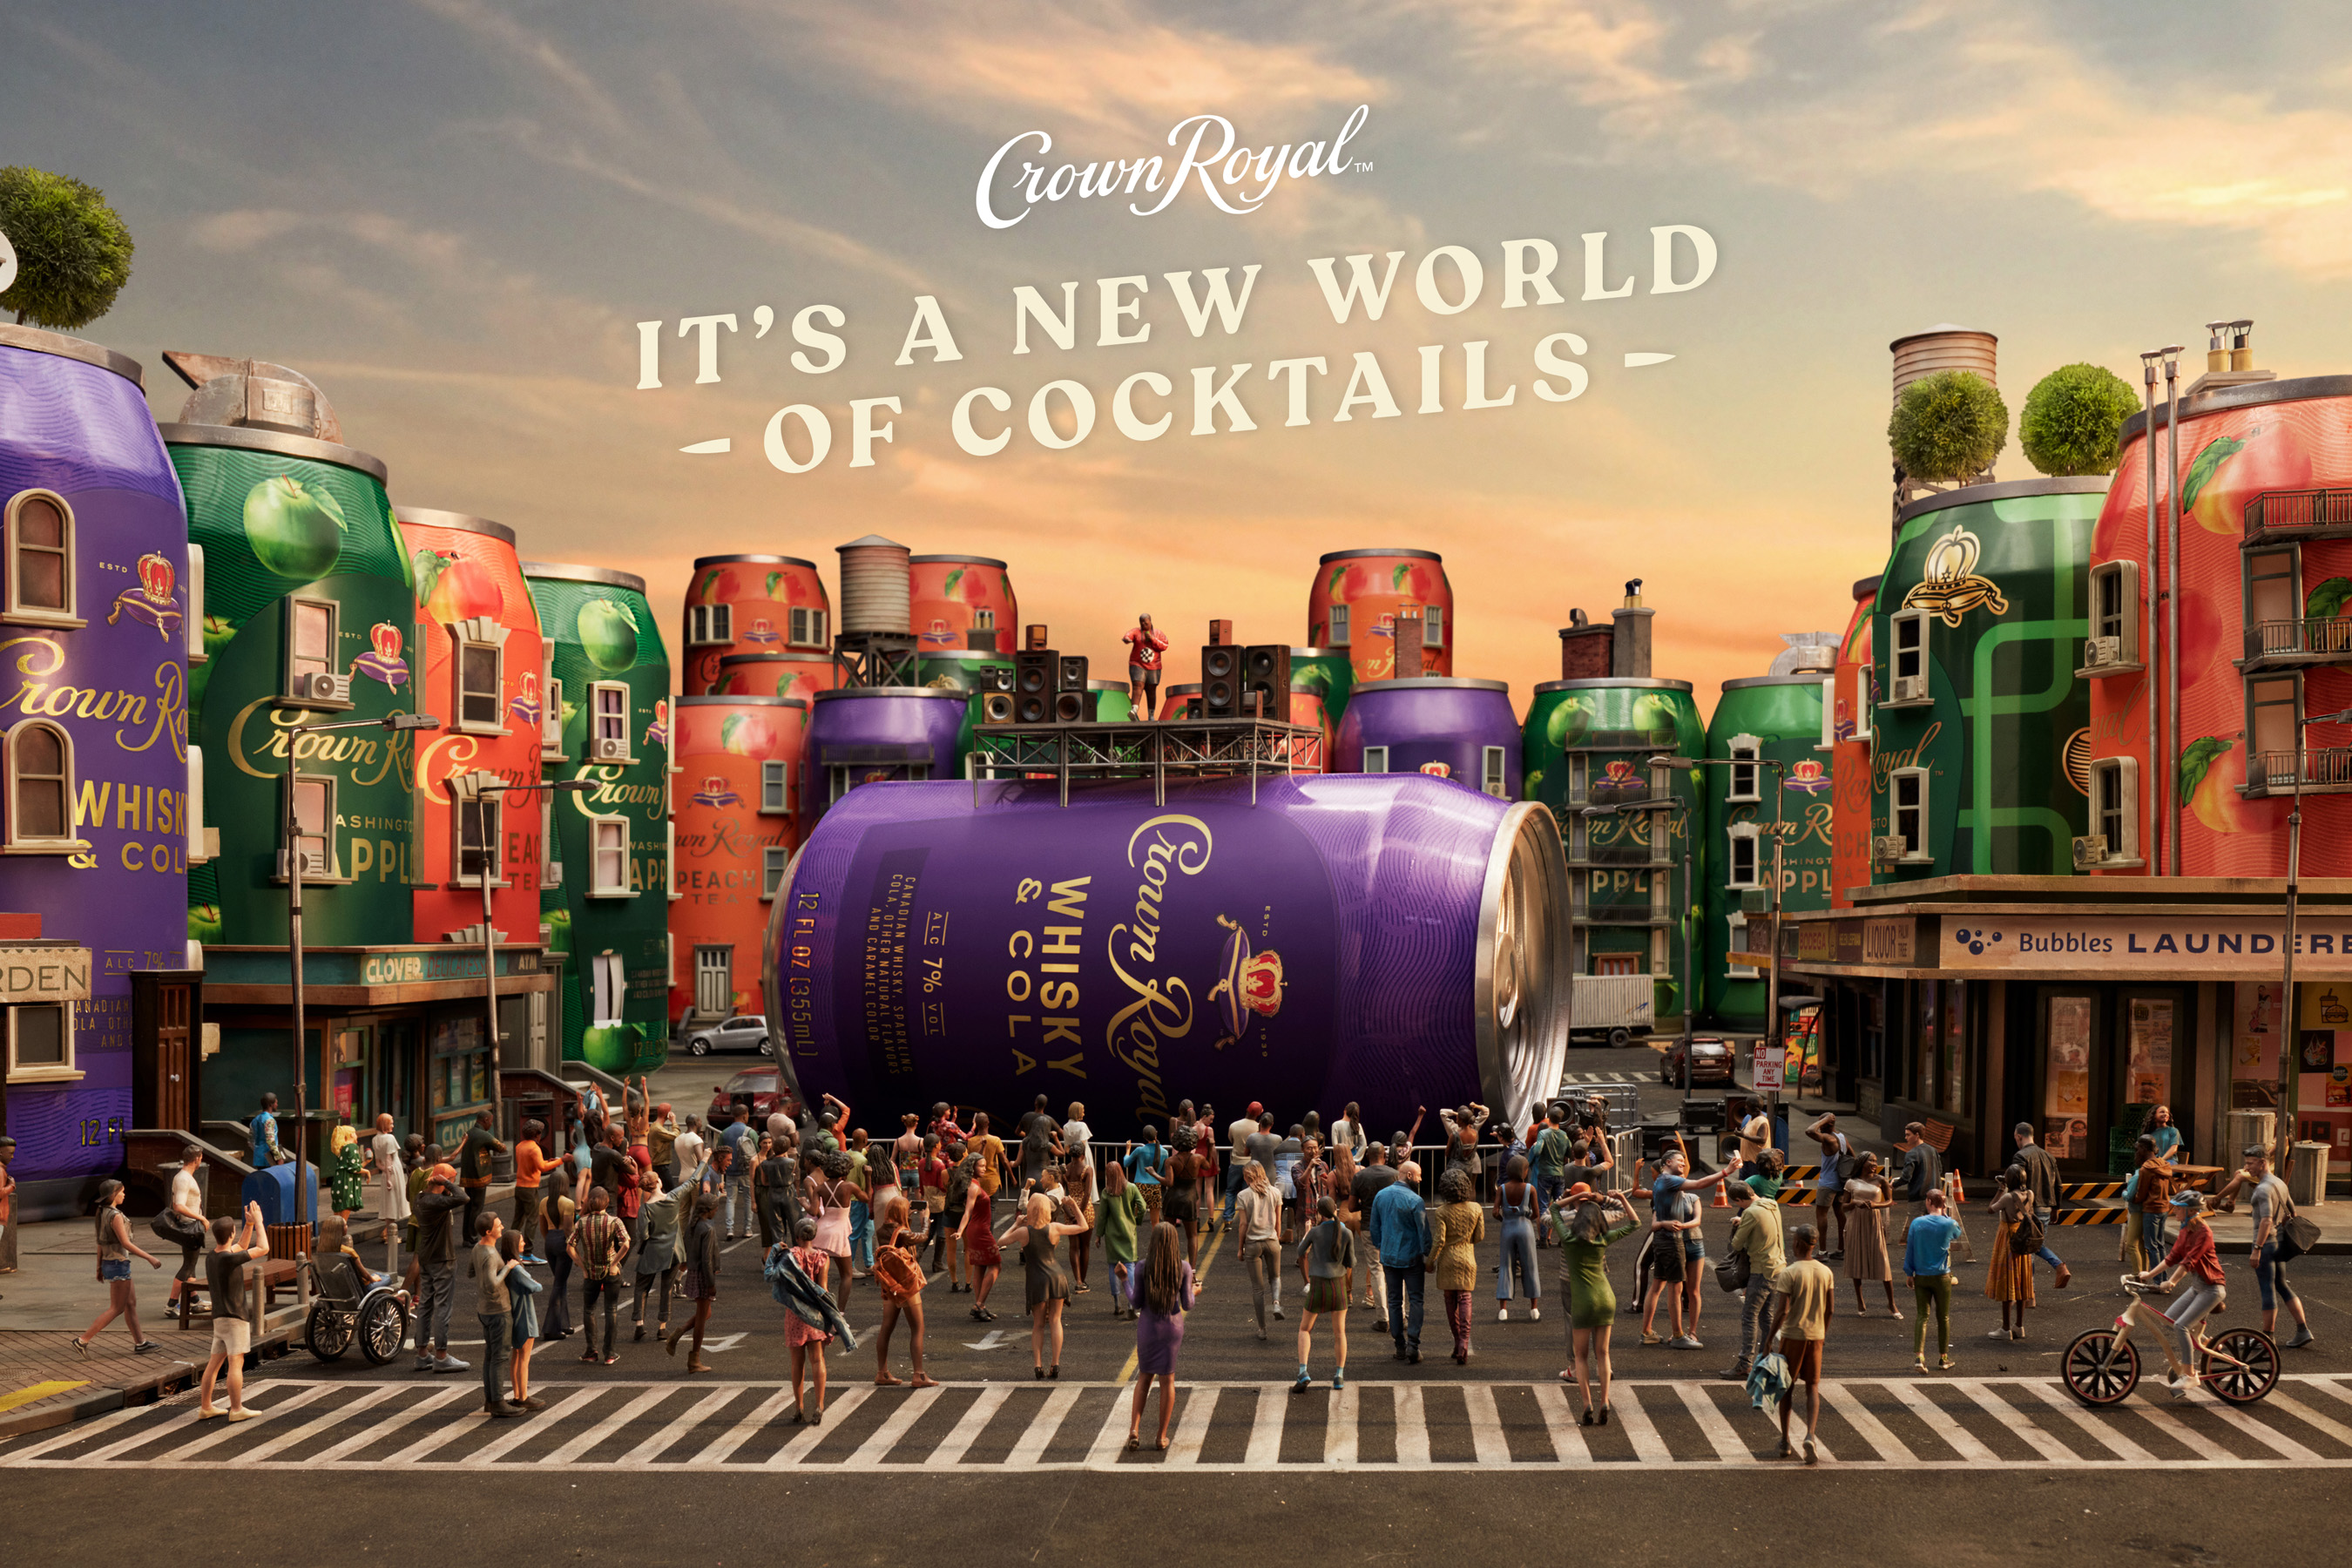 Crown Royal illustration of people playing basketball by a giant Crown Royal can